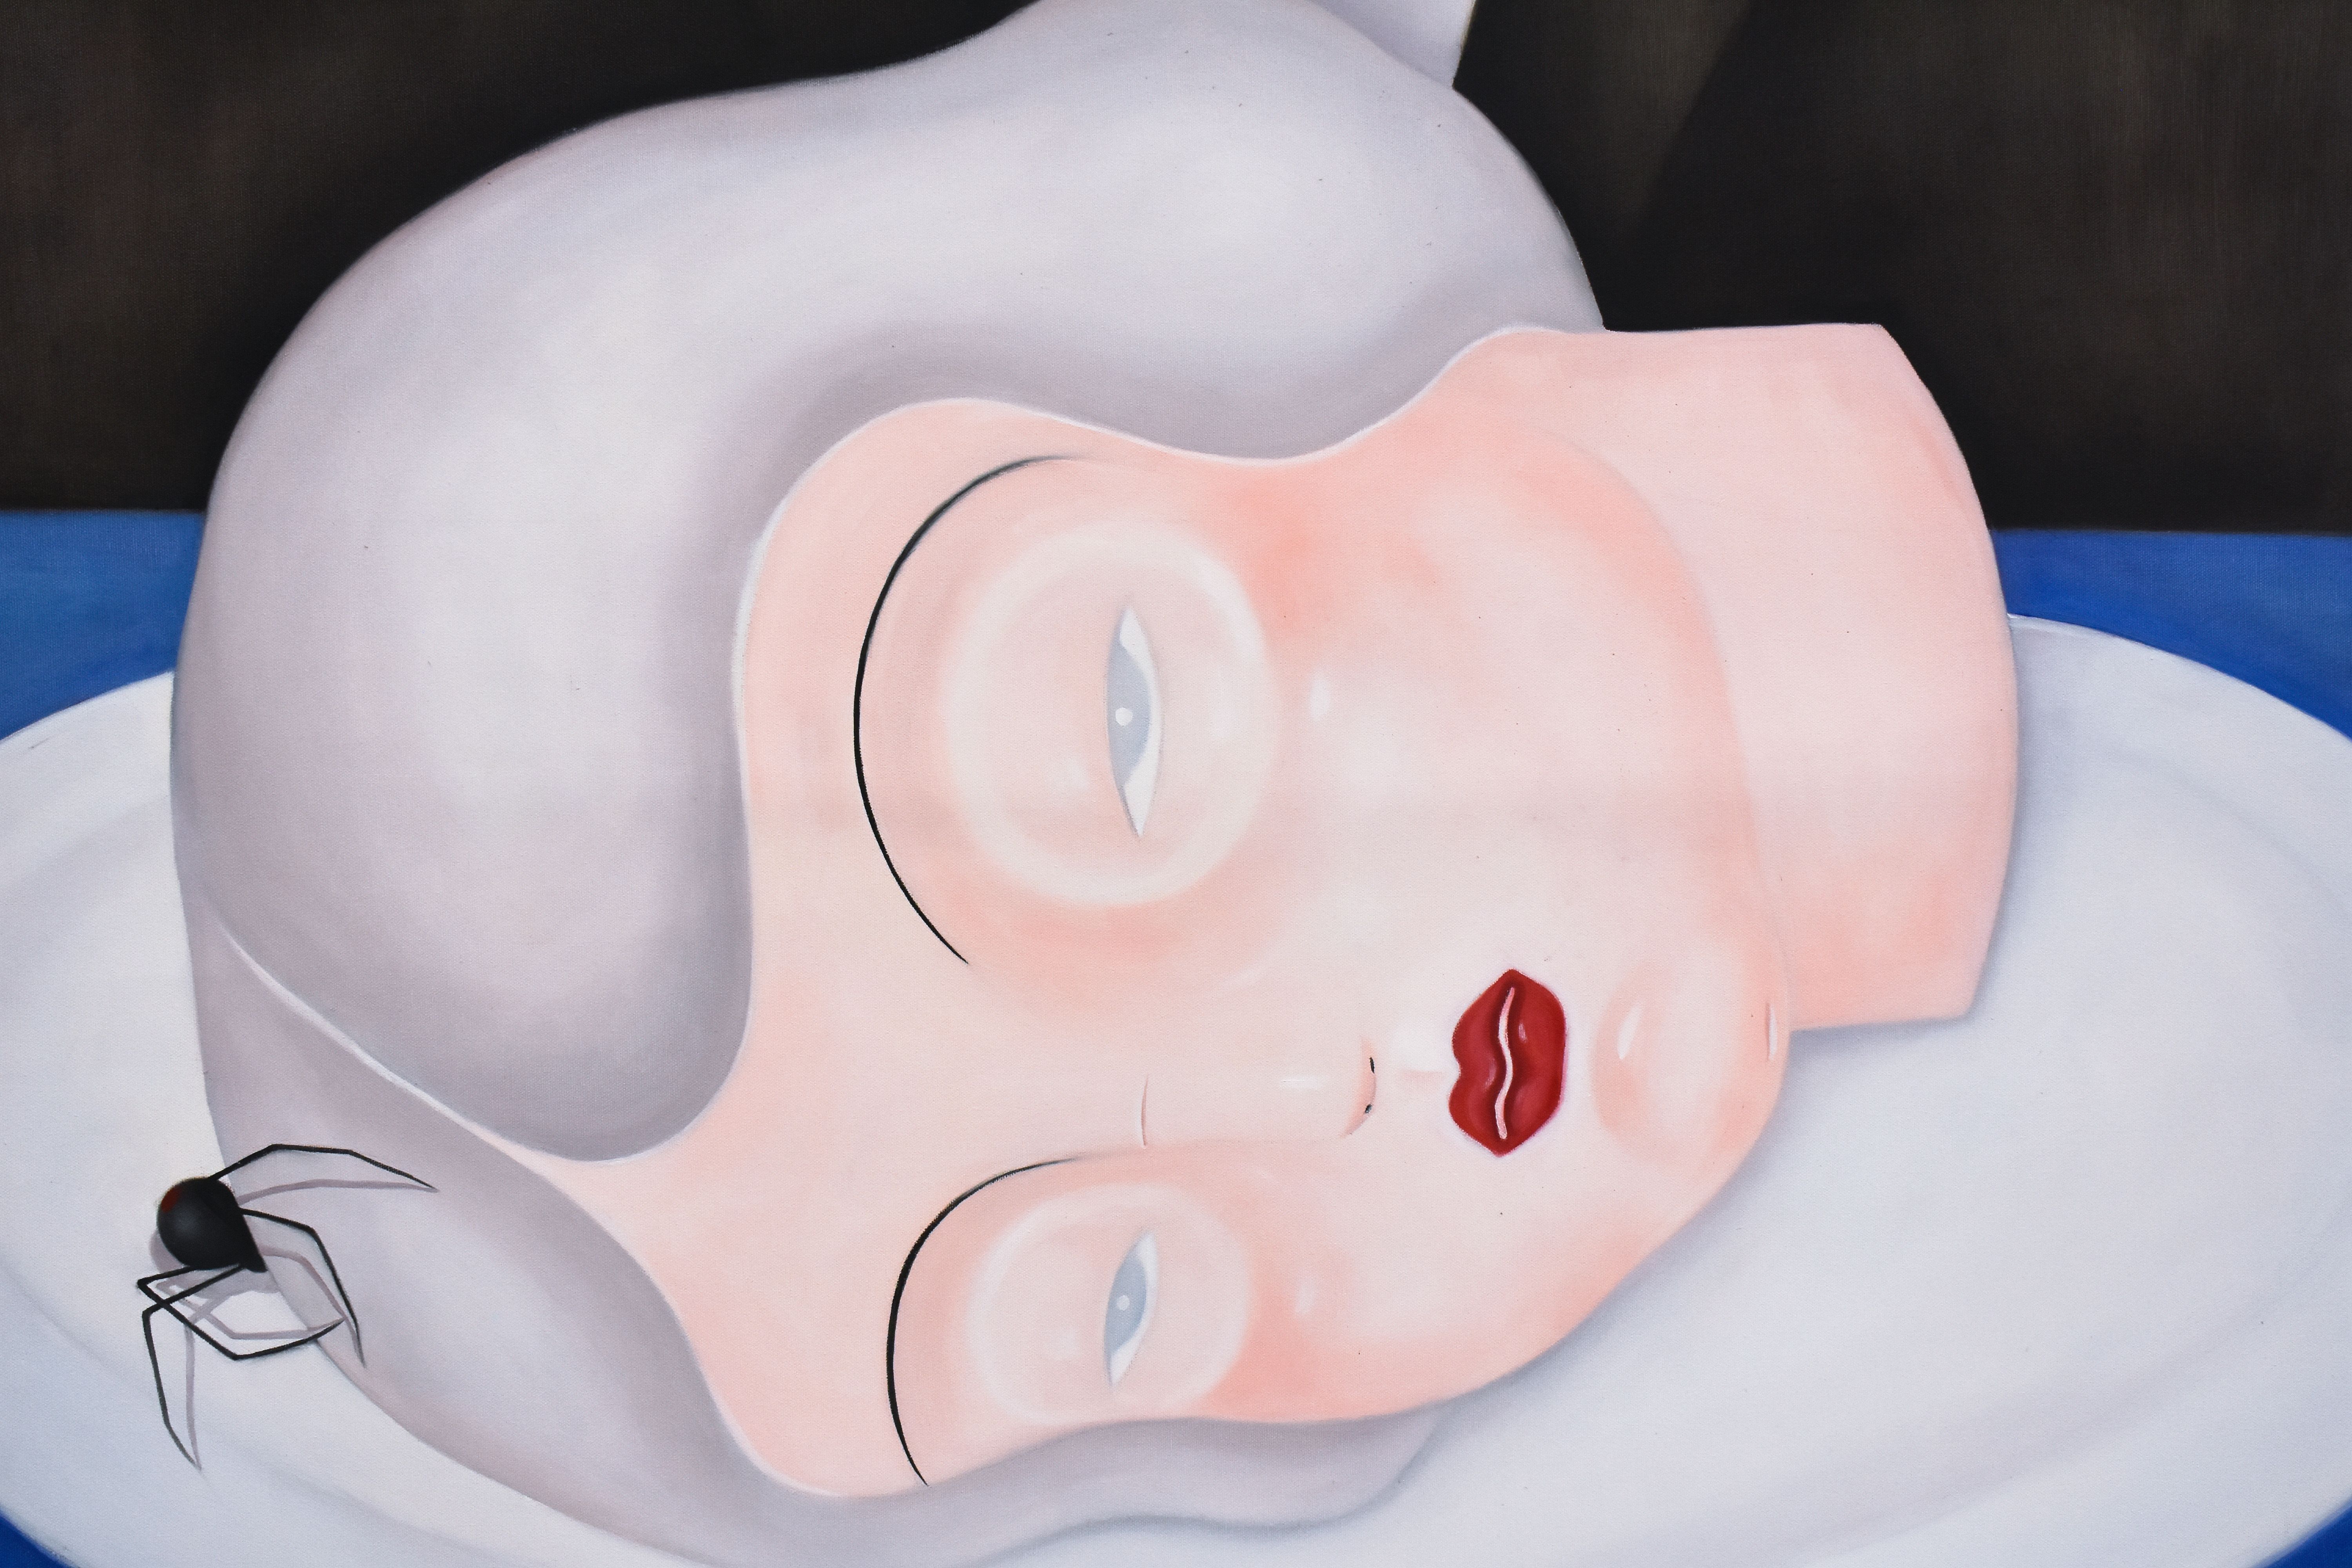 A painting of a severed girl's head on a plate, she has red lipstick and grey hair. There is a spider on the top of her head